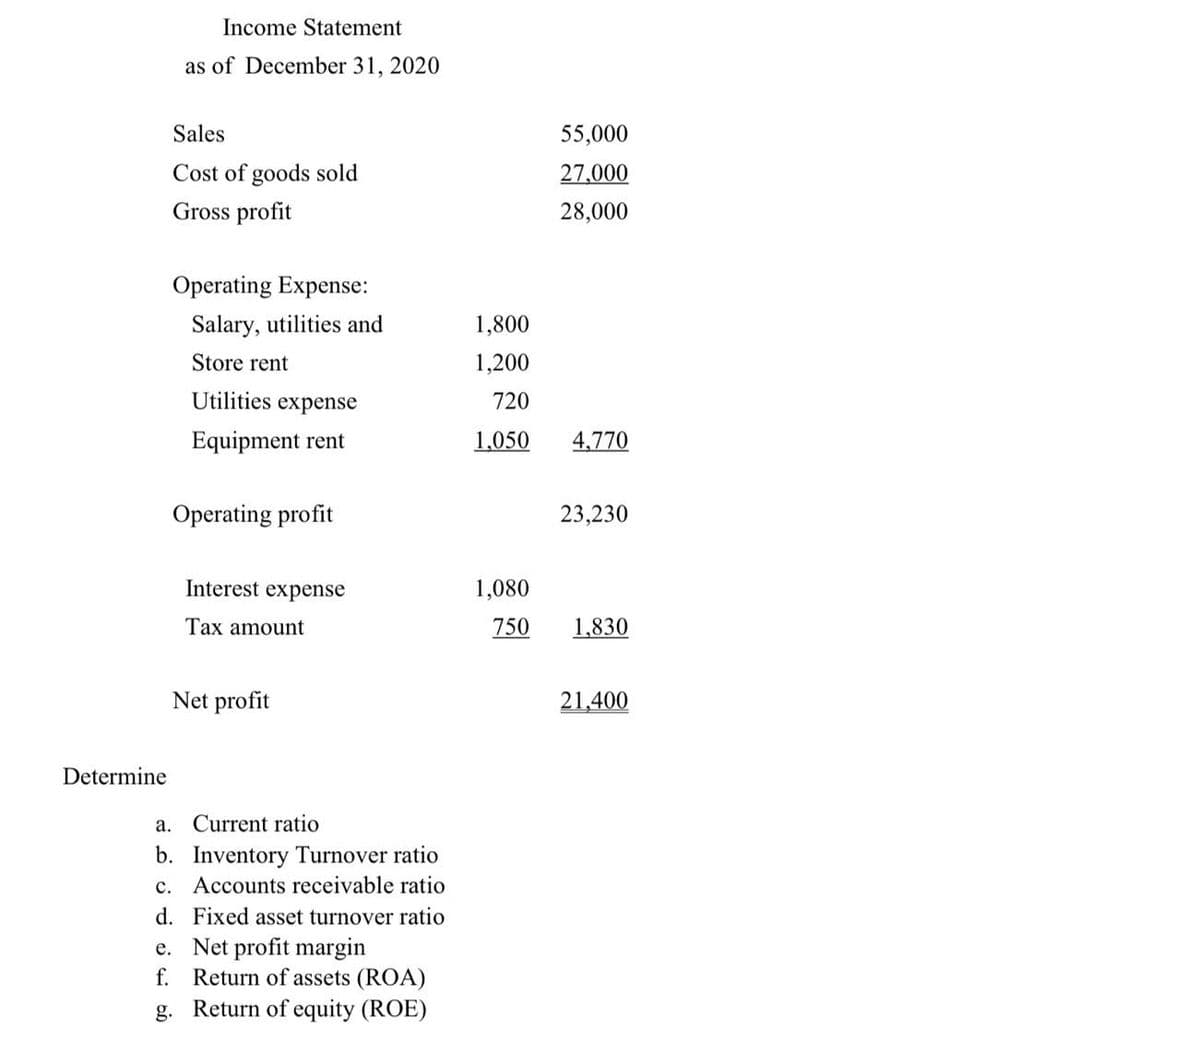 Income Statement
as of December 31, 2020
Sales
55,000
Cost of goods sold
27,000
Gross profit
28,000
Operating Expense:
Salary, utilities and
1,800
Store rent
1,200
Utilities expense
720
Equipment rent
1.050
4,770
Operating profit
23,230
Interest expense
1,080
Tax amount
750
1,830
Net profit
21,400
Determine
a. Current ratio
b. Inventory Turnover ratio
c. Accounts receivable ratio
d. Fixed asset turnover ratio
e. Net profit margin
f. Return of assets (ROA)
g. Return of equity (ROE)
